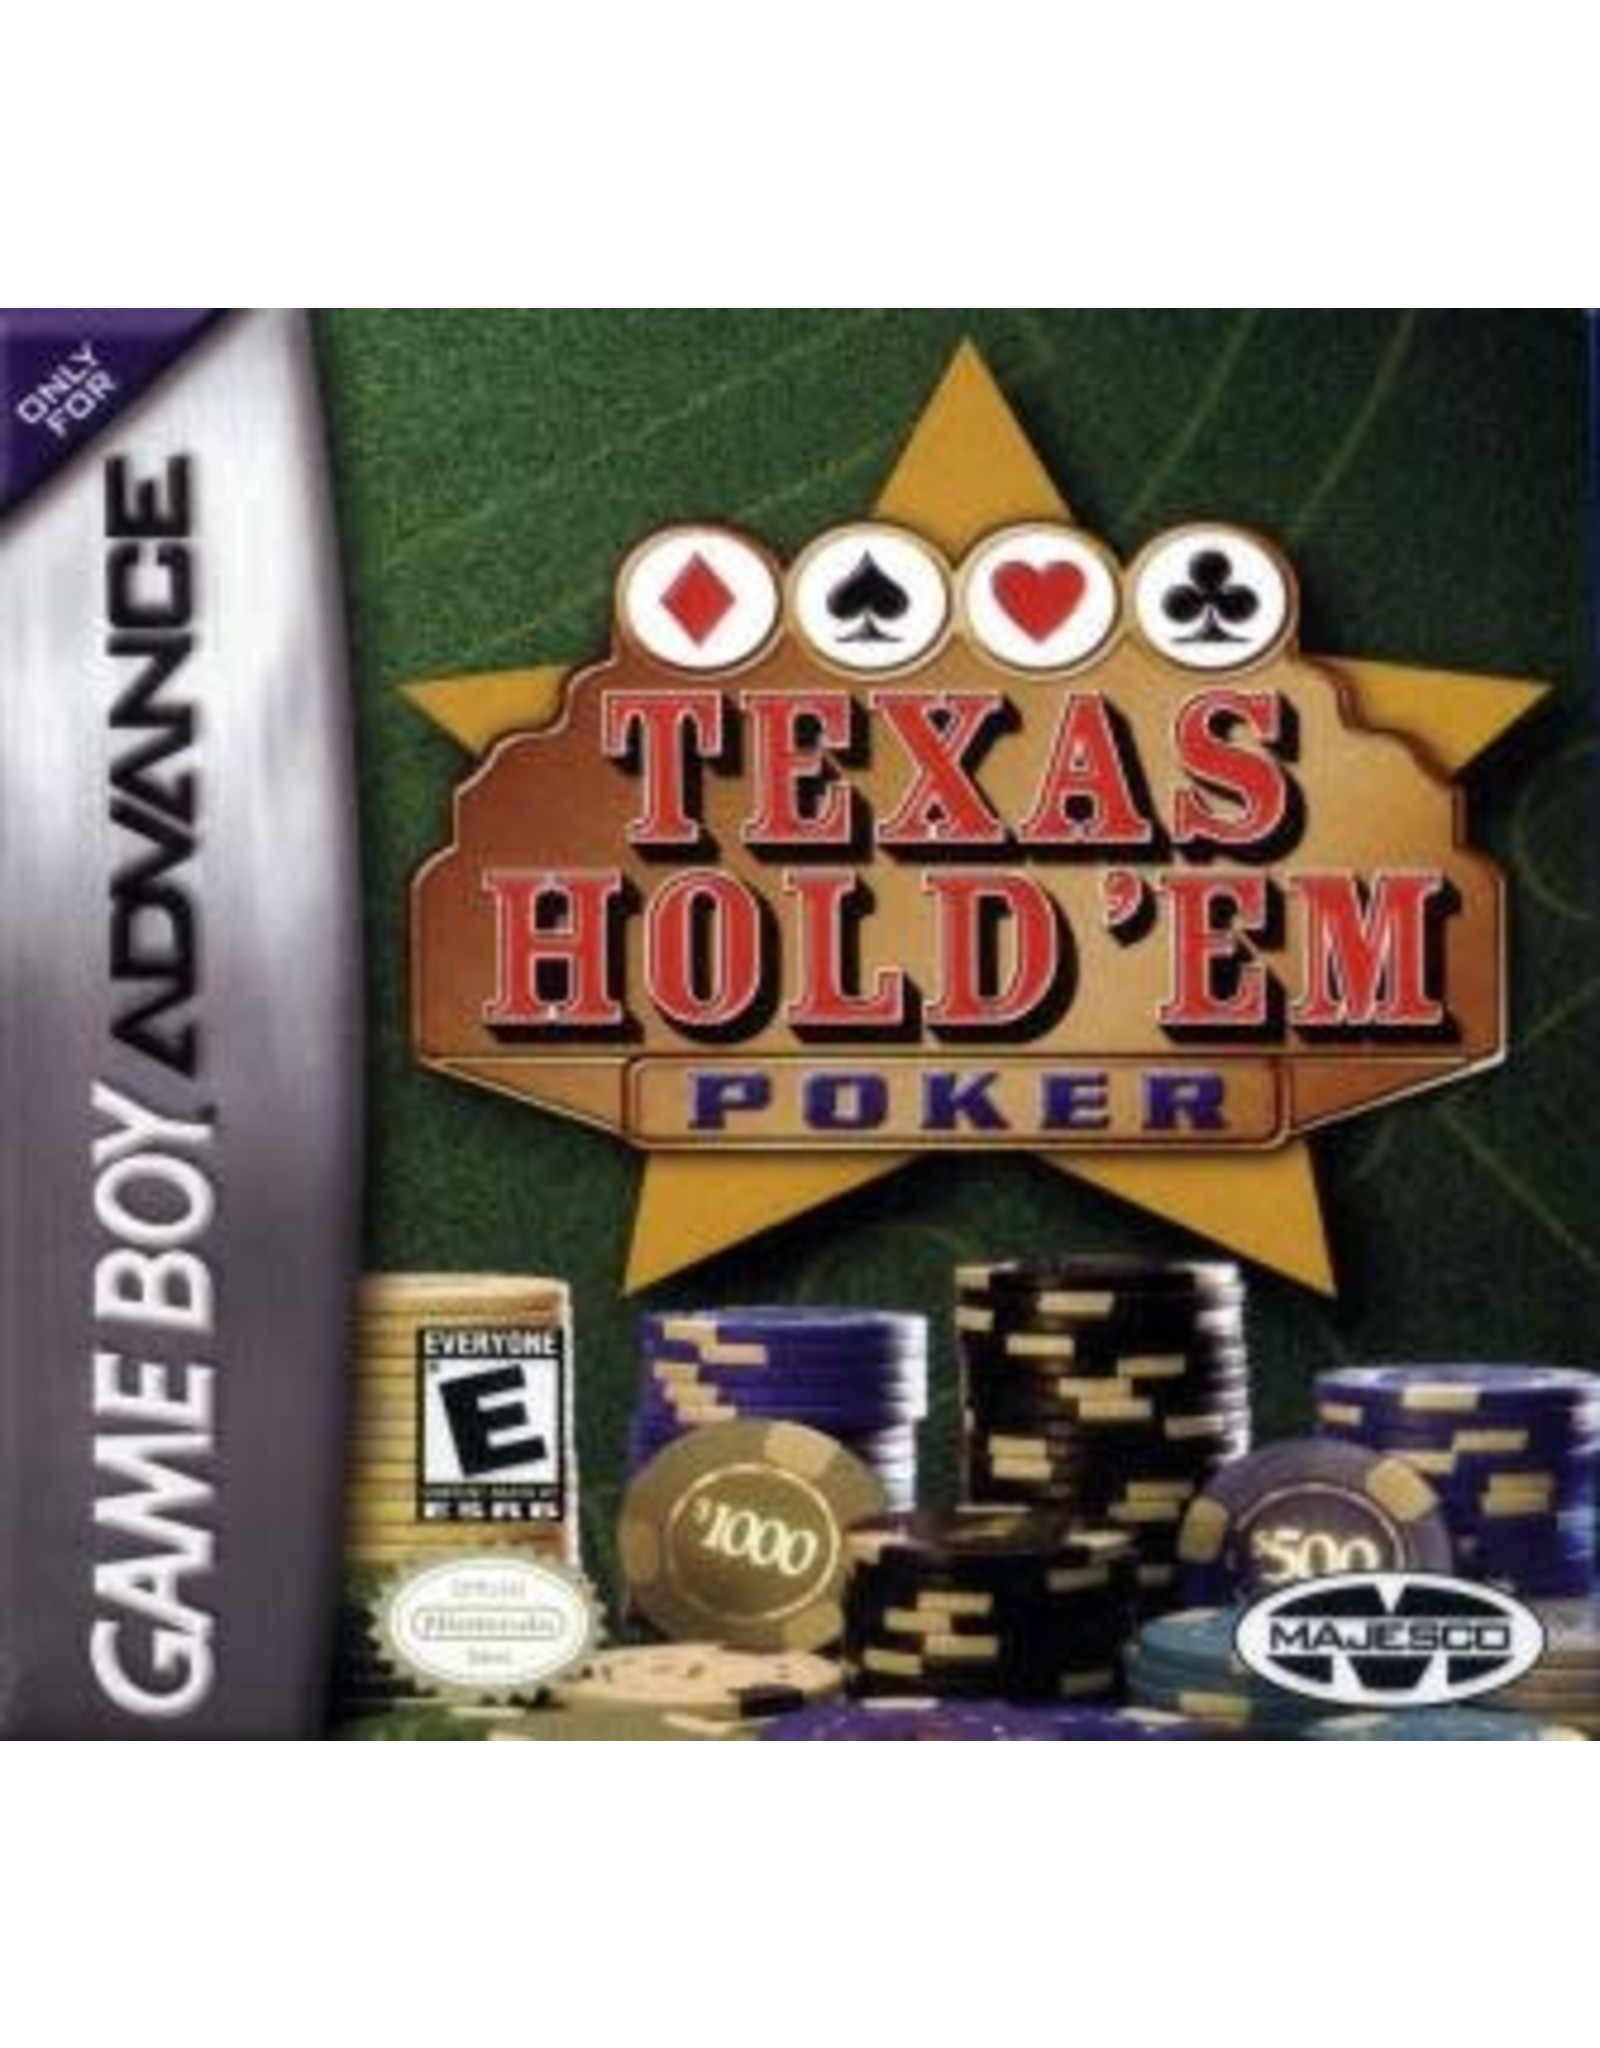 Game Boy Advance Texas Hold Em Poker (Used, Cart Only)